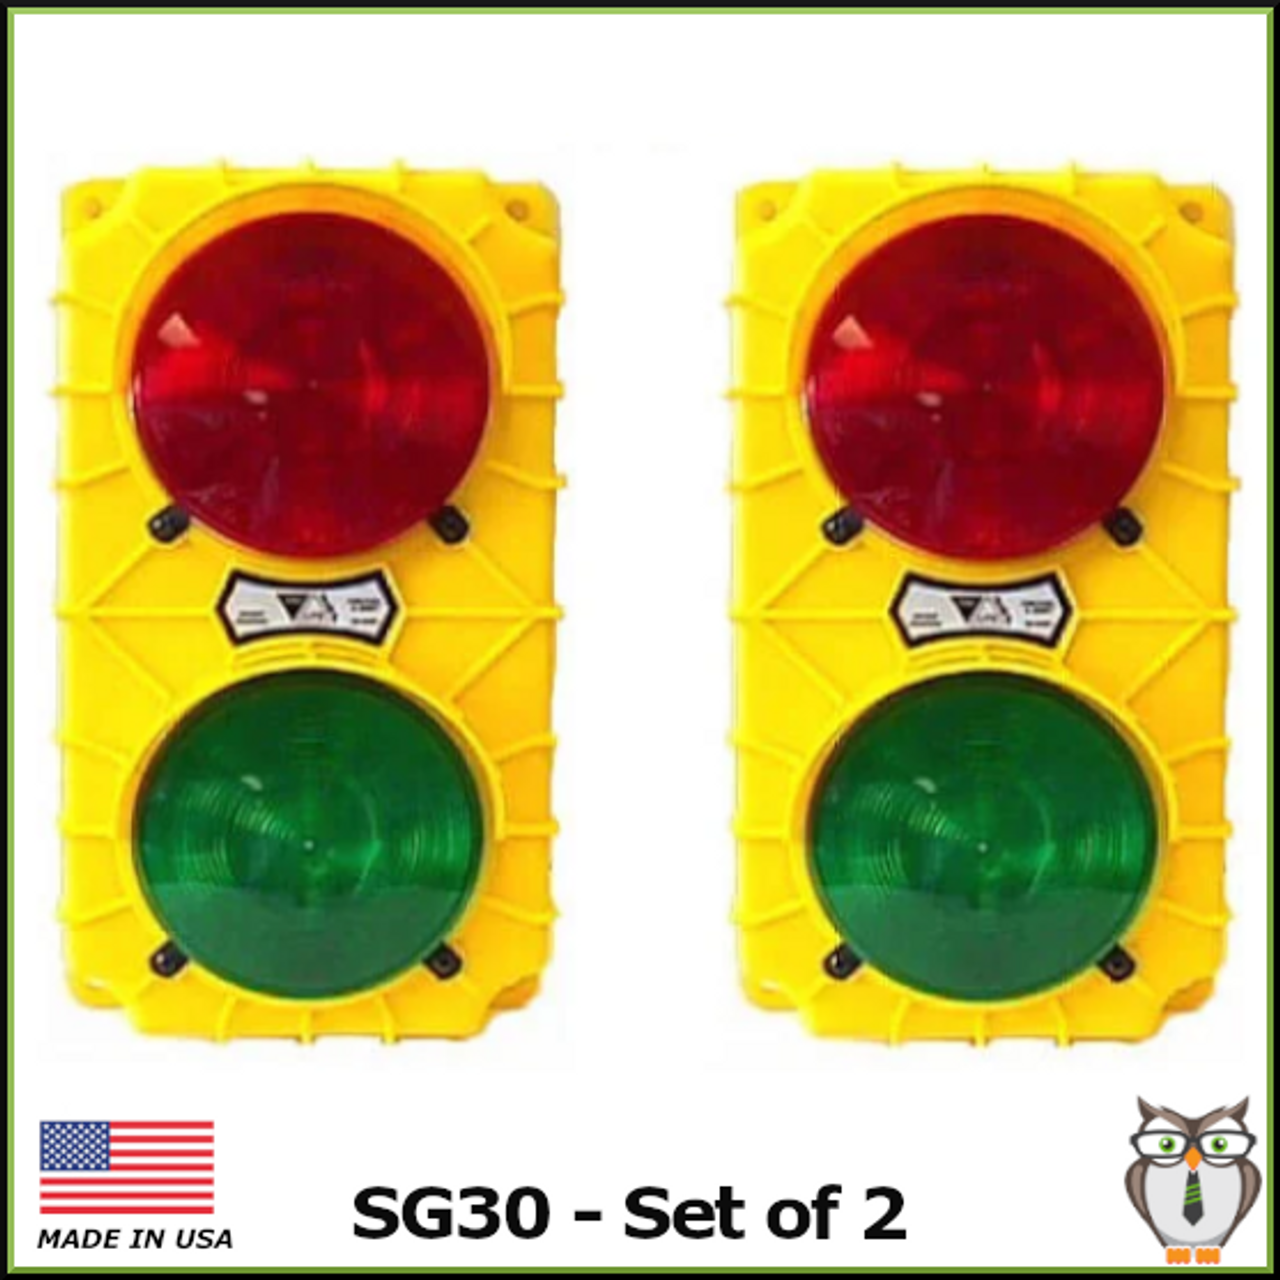 Stop and Go Loading Dock Safety Light Set SG30 - Yellow Housing